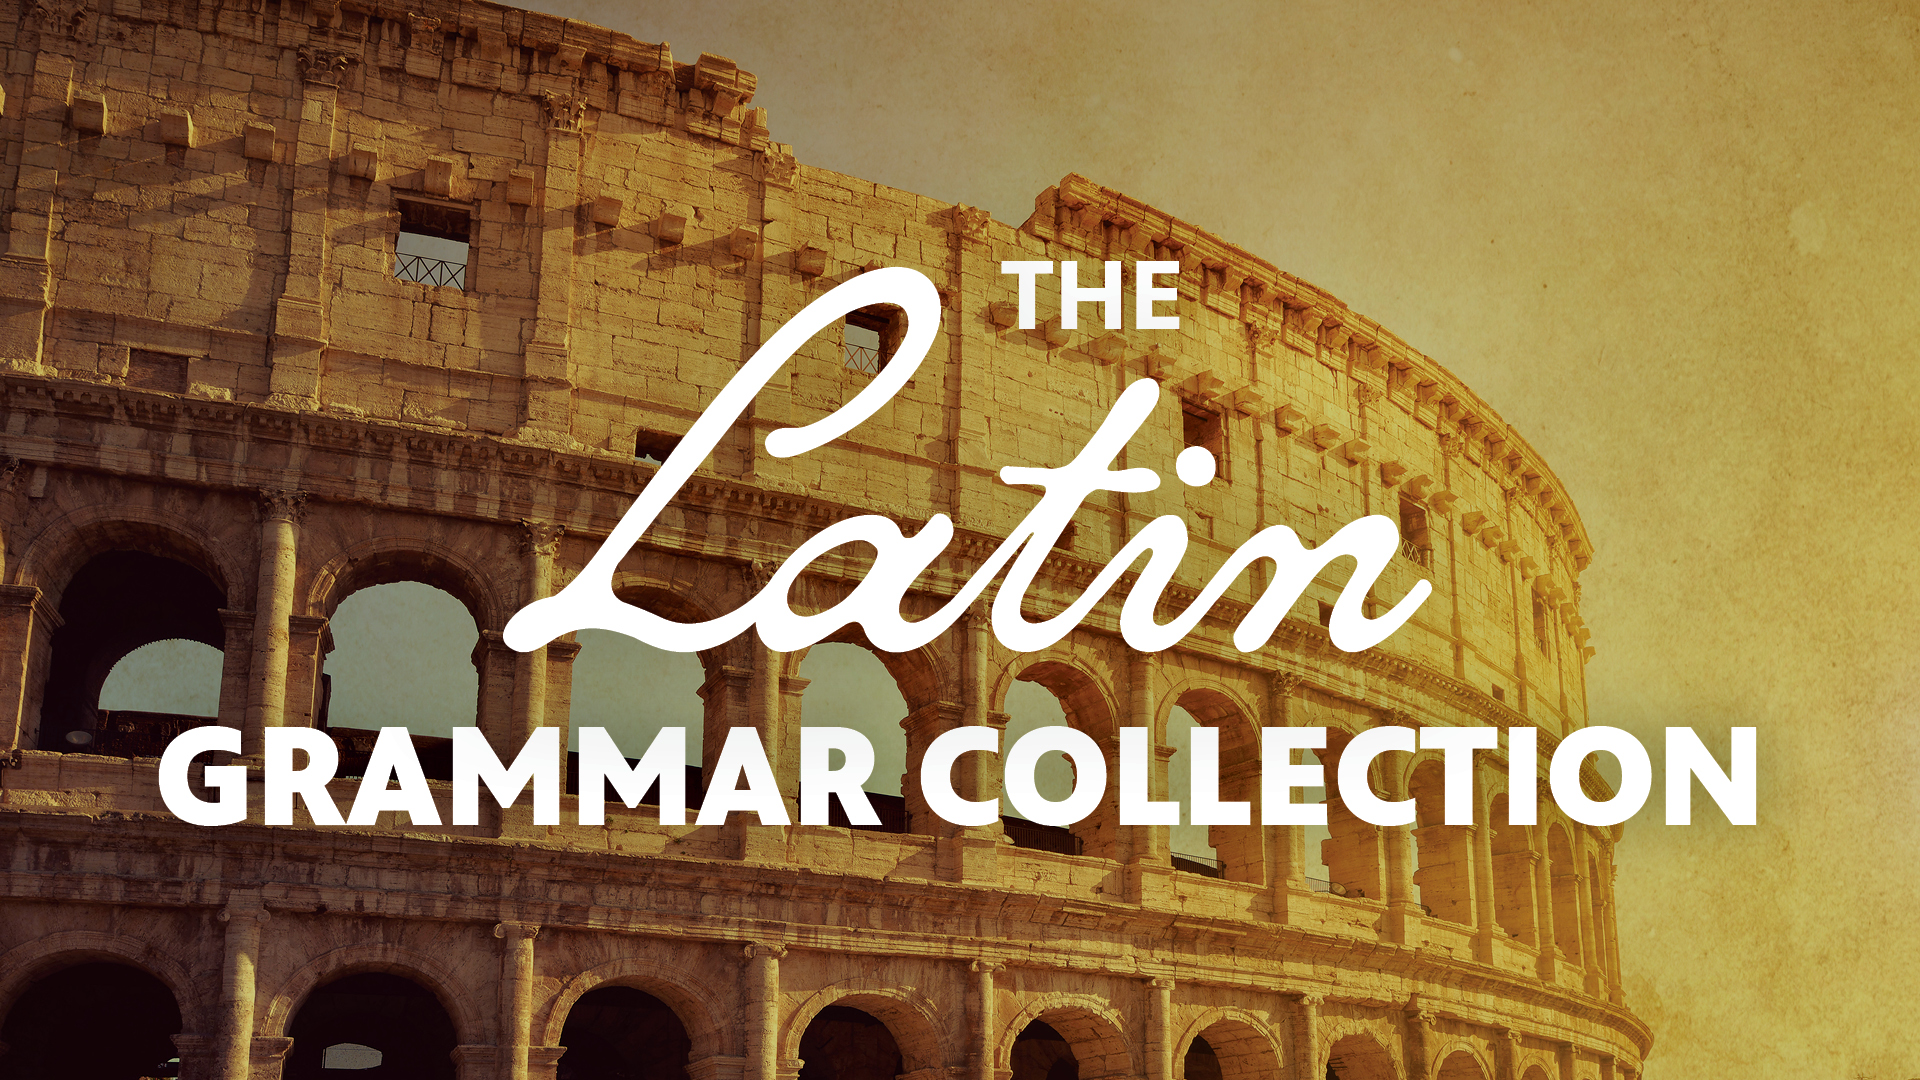 A picture of the Colosseum behind the text "The Latin Grammar Collection."